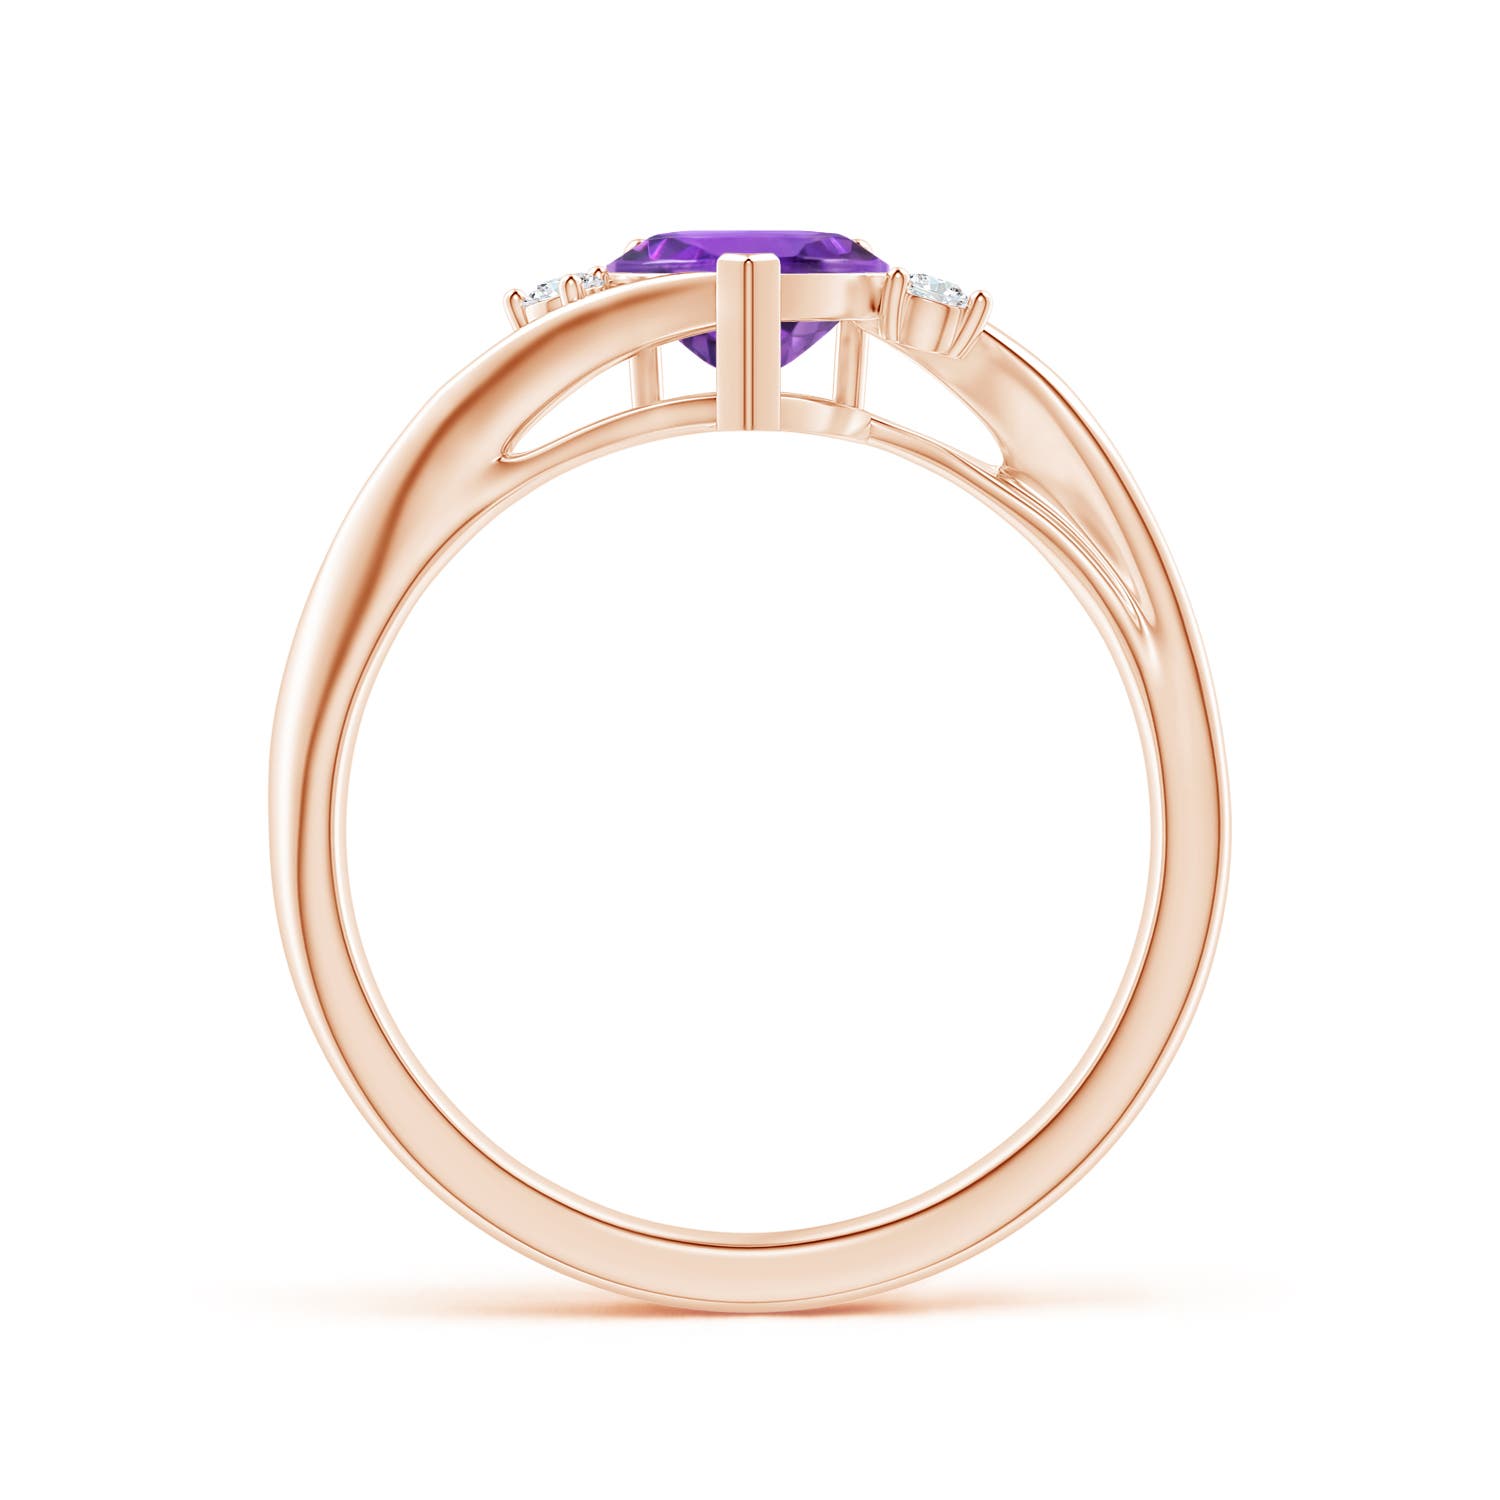 AAA - Amethyst / 0.75 CT / 14 KT Rose Gold